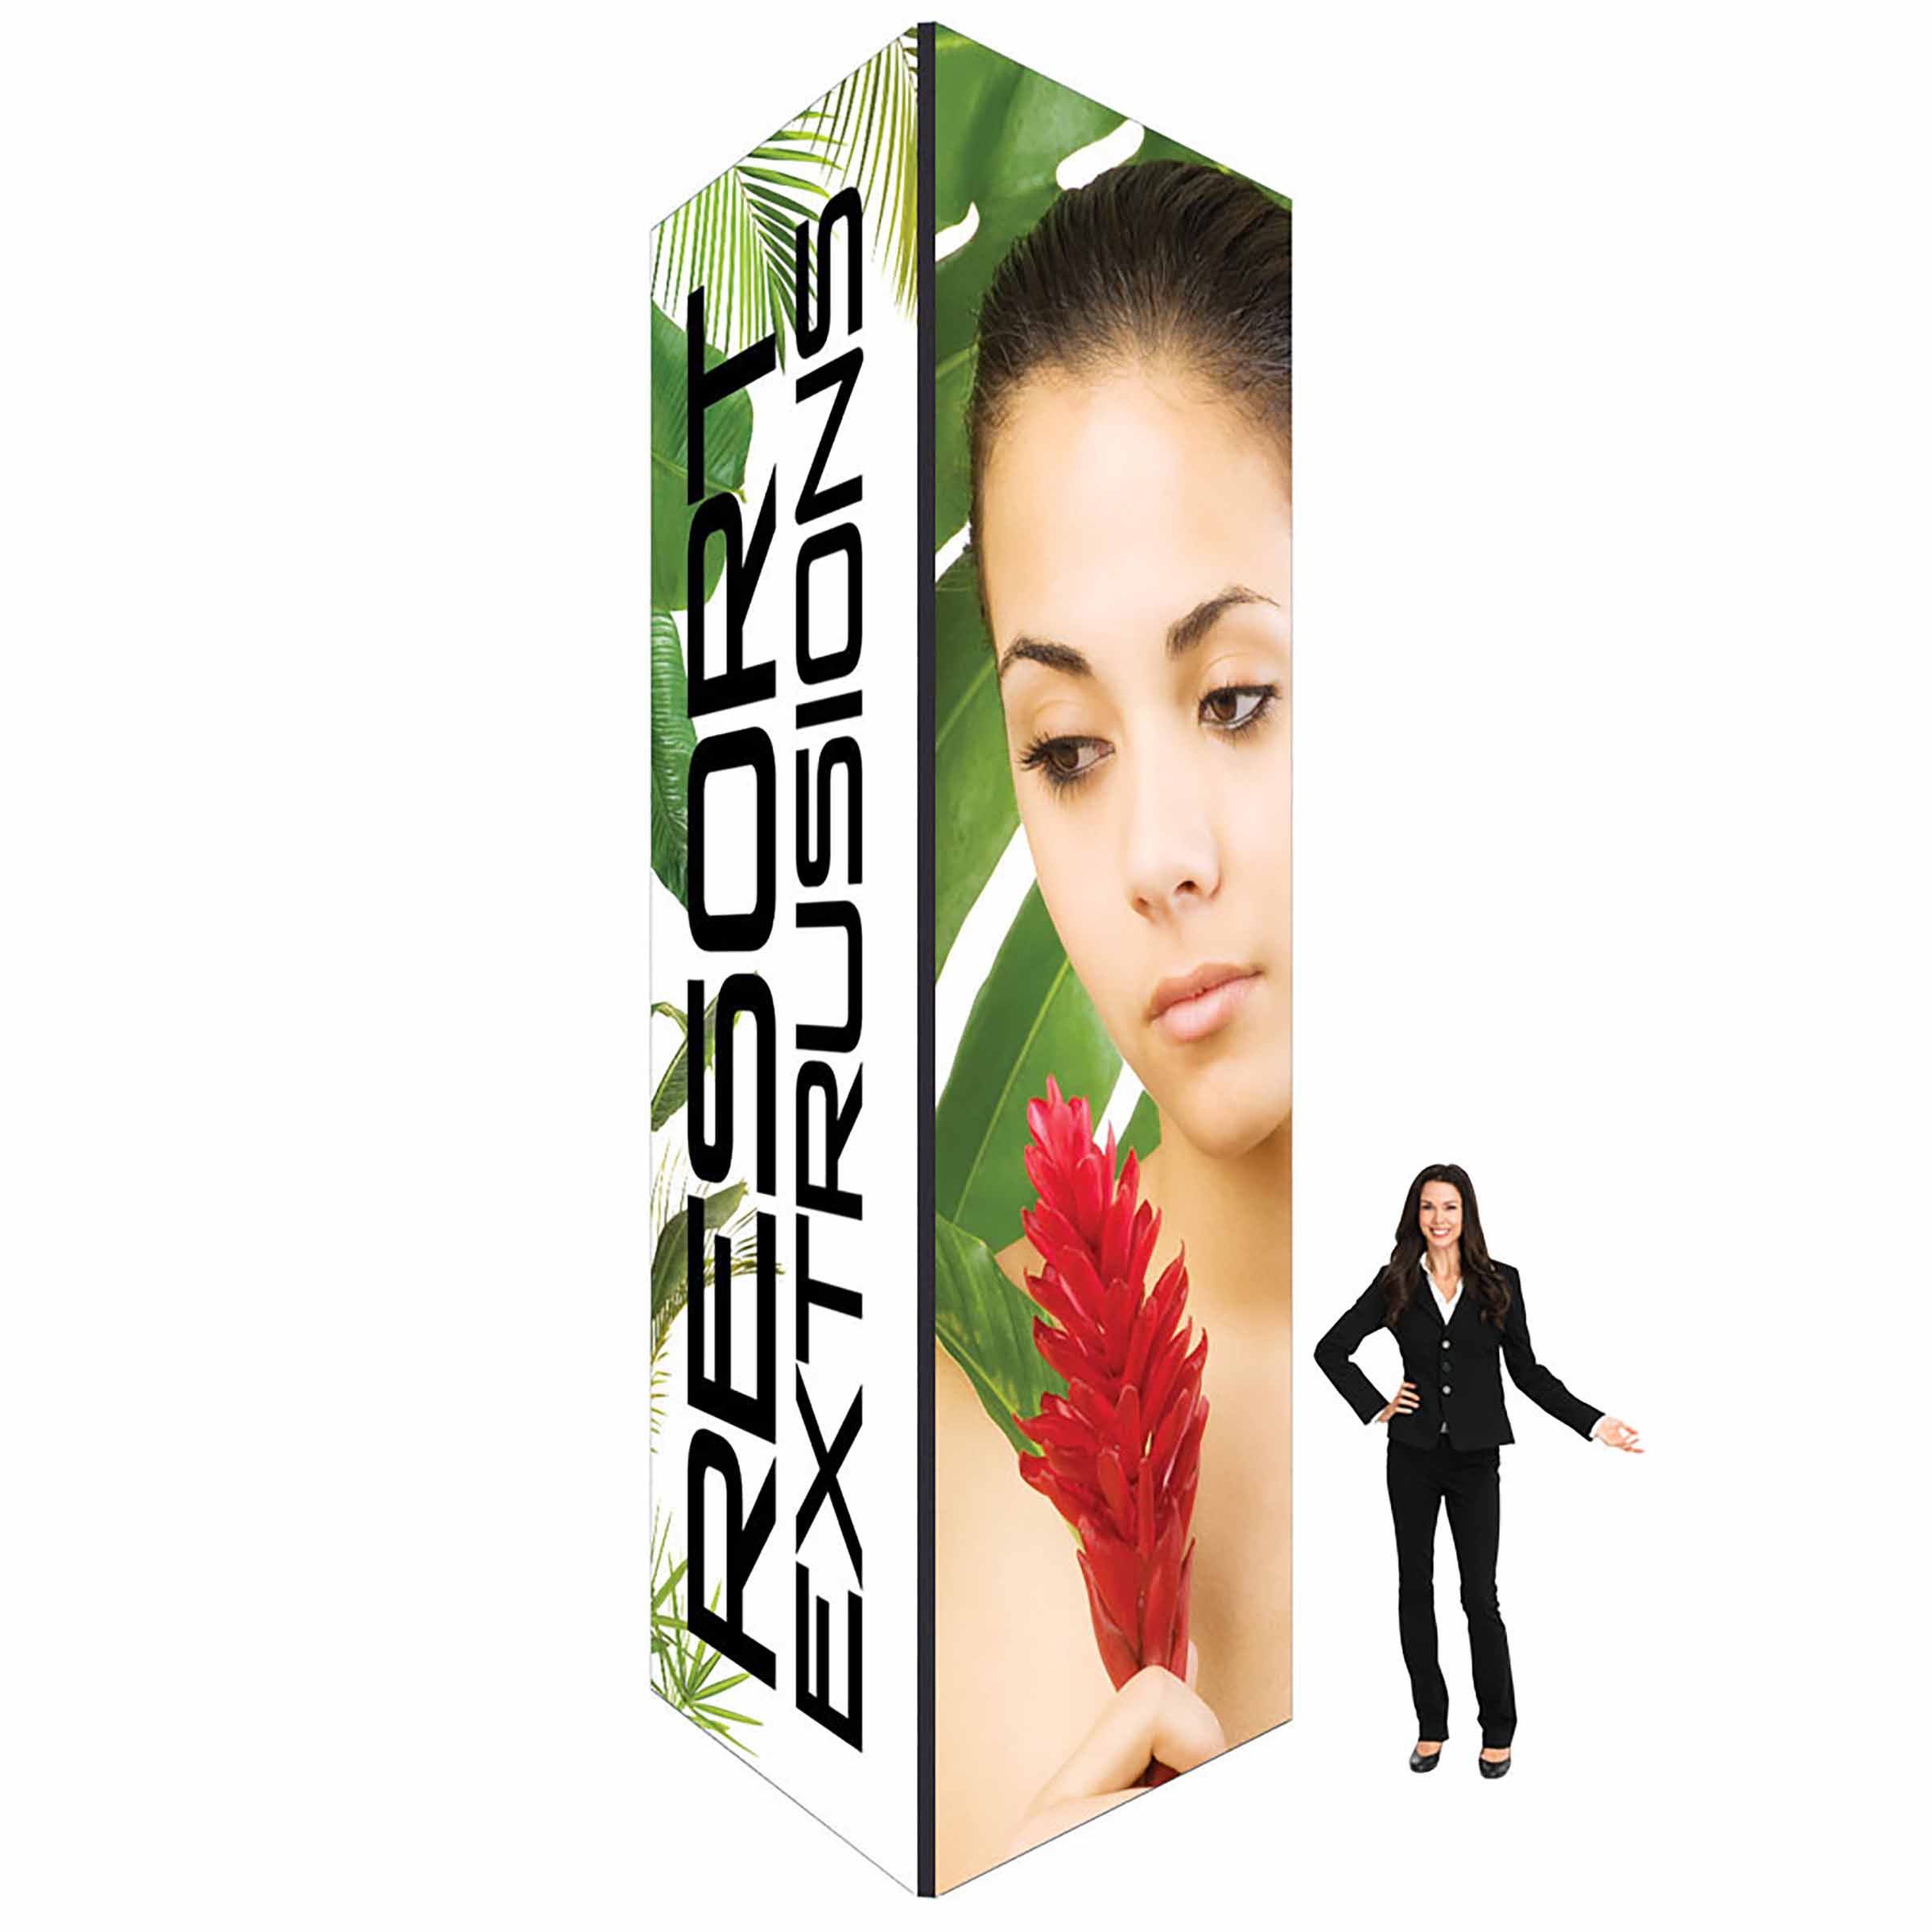 5ft X 16ft SEG (Silicone Edge Graphic) Square Black Frame Non-Backlit Tower Package